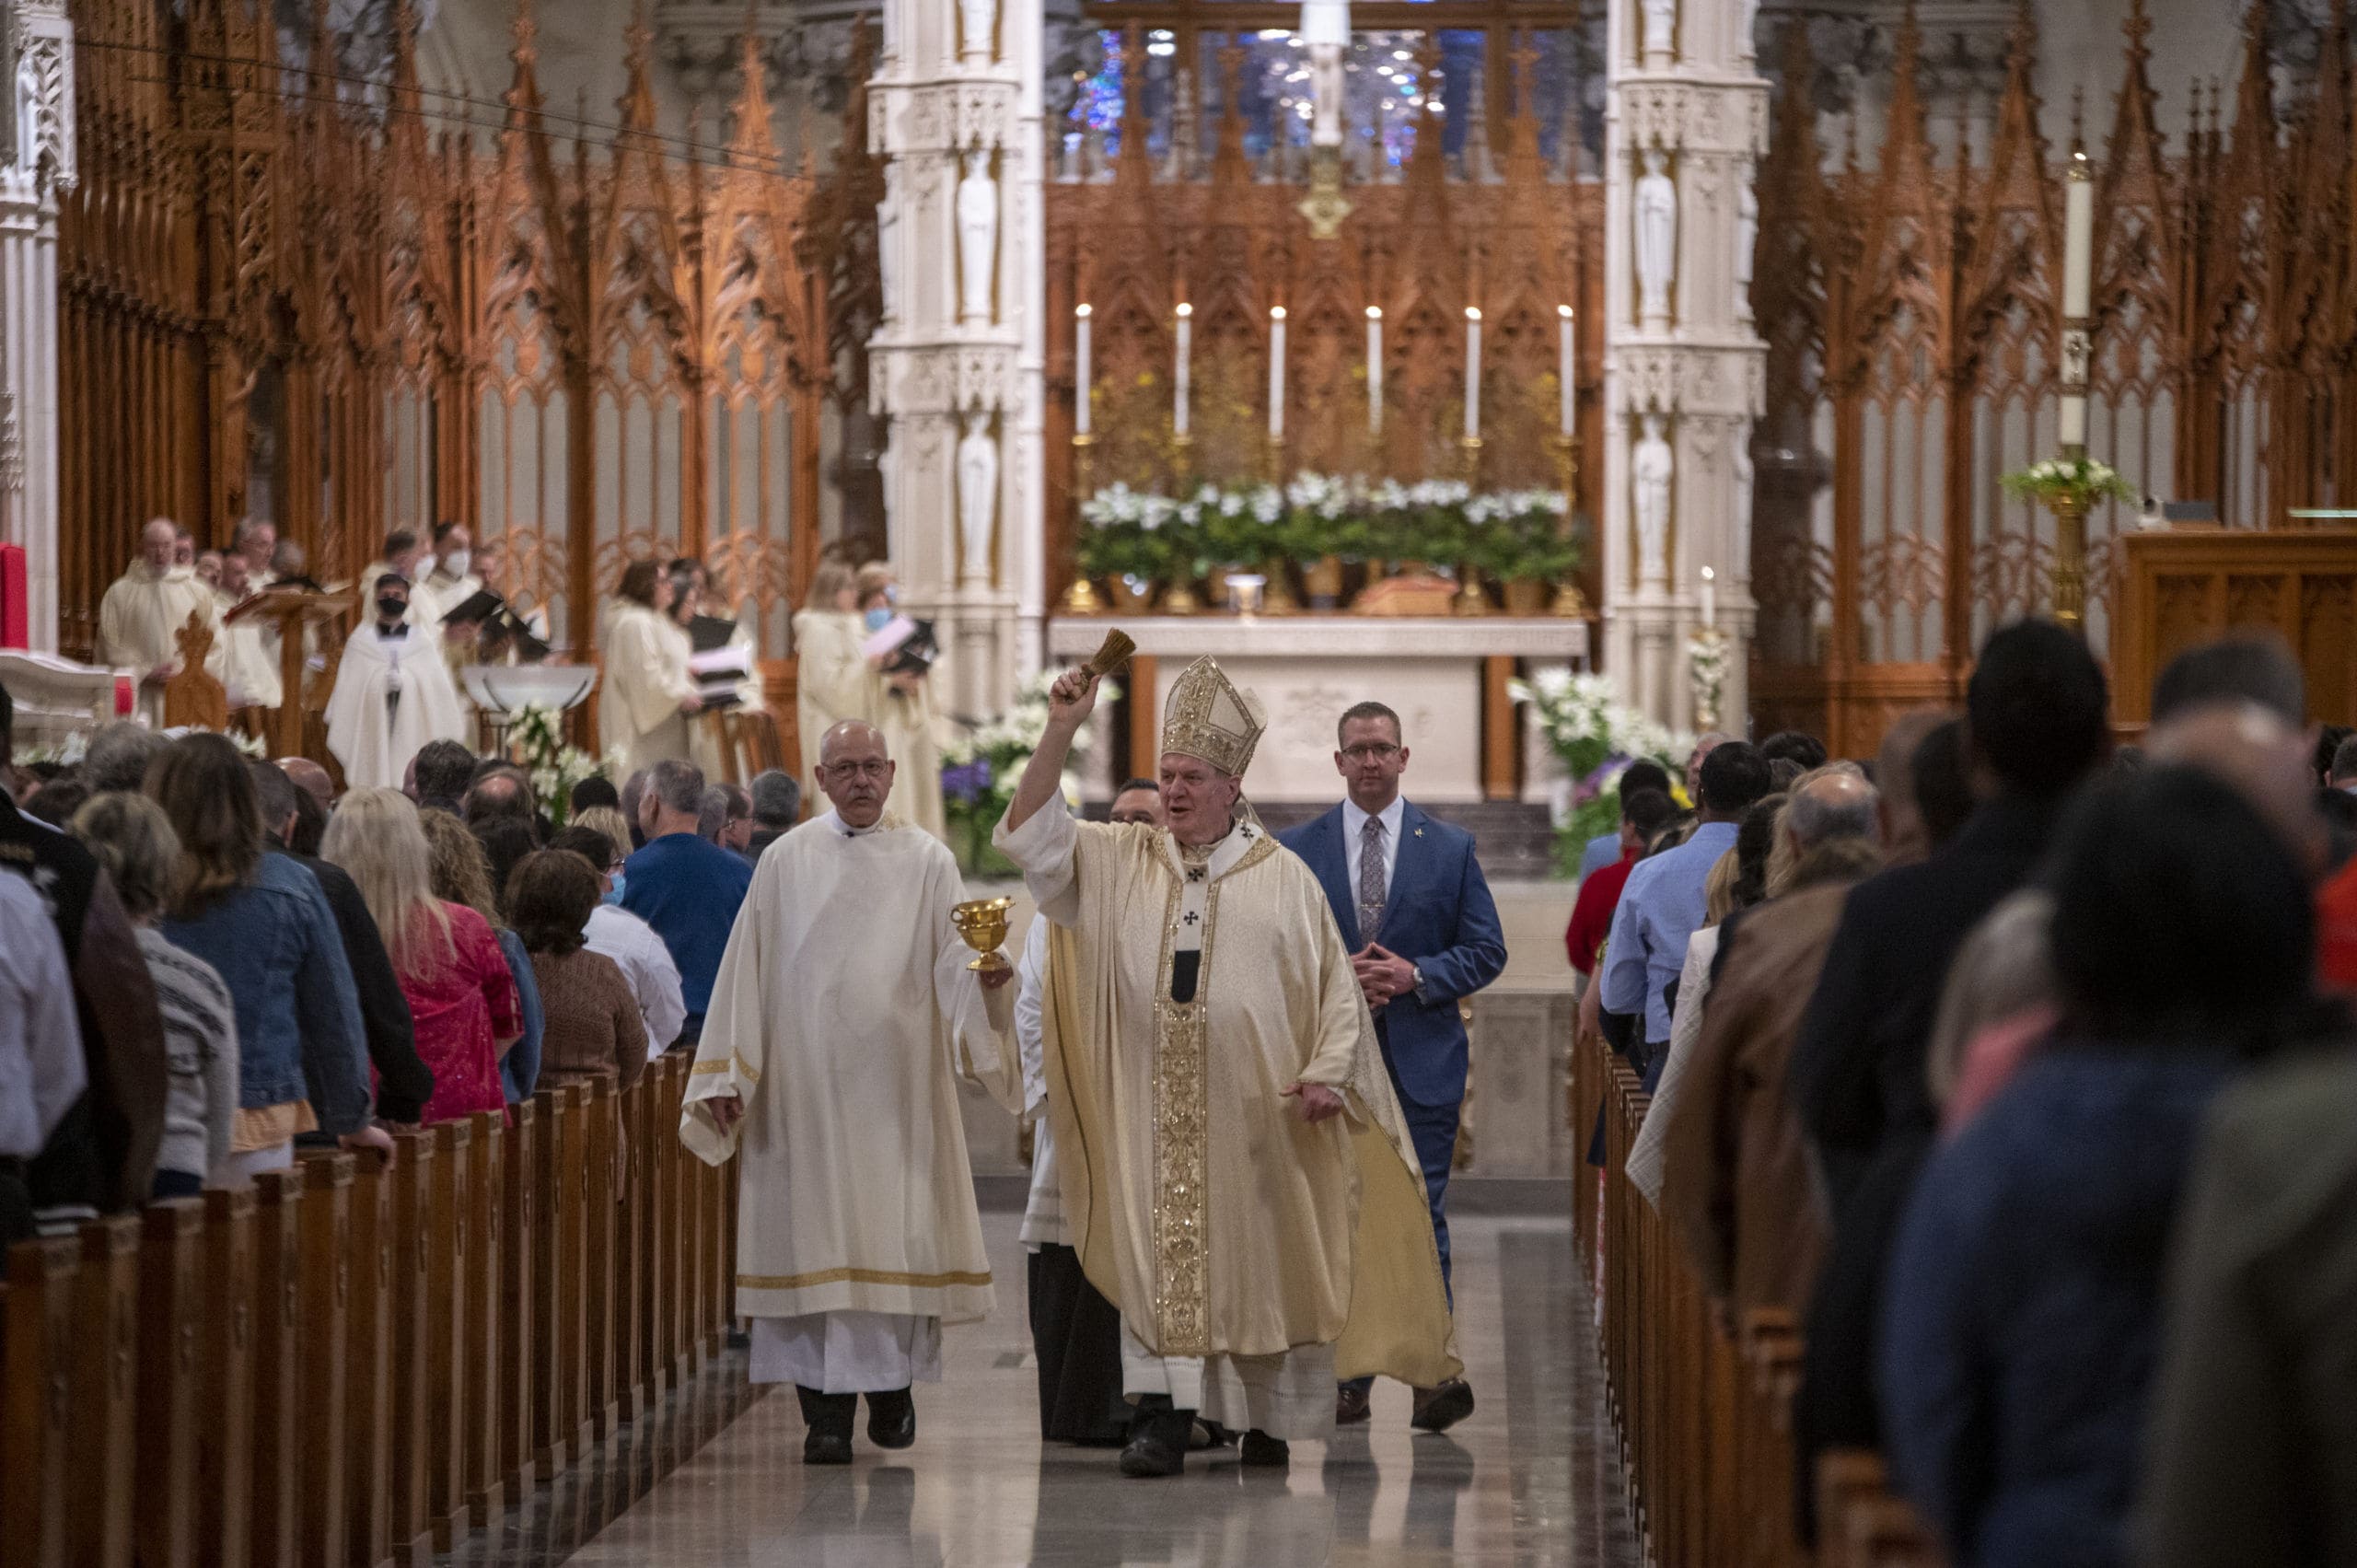 Cardinal Joseph W. Tobin, C.Ss.R., celebrated Easter Sunday Mass at the Cathedral Basilica of the Sacred Heart in Newark on April 17. Easter Sunday celebrates the Resurrection of Jesus Christ the Lord and his victory over sin and death (Photo by Julio Eduardo Herrera for the Archdiocese of Newark).